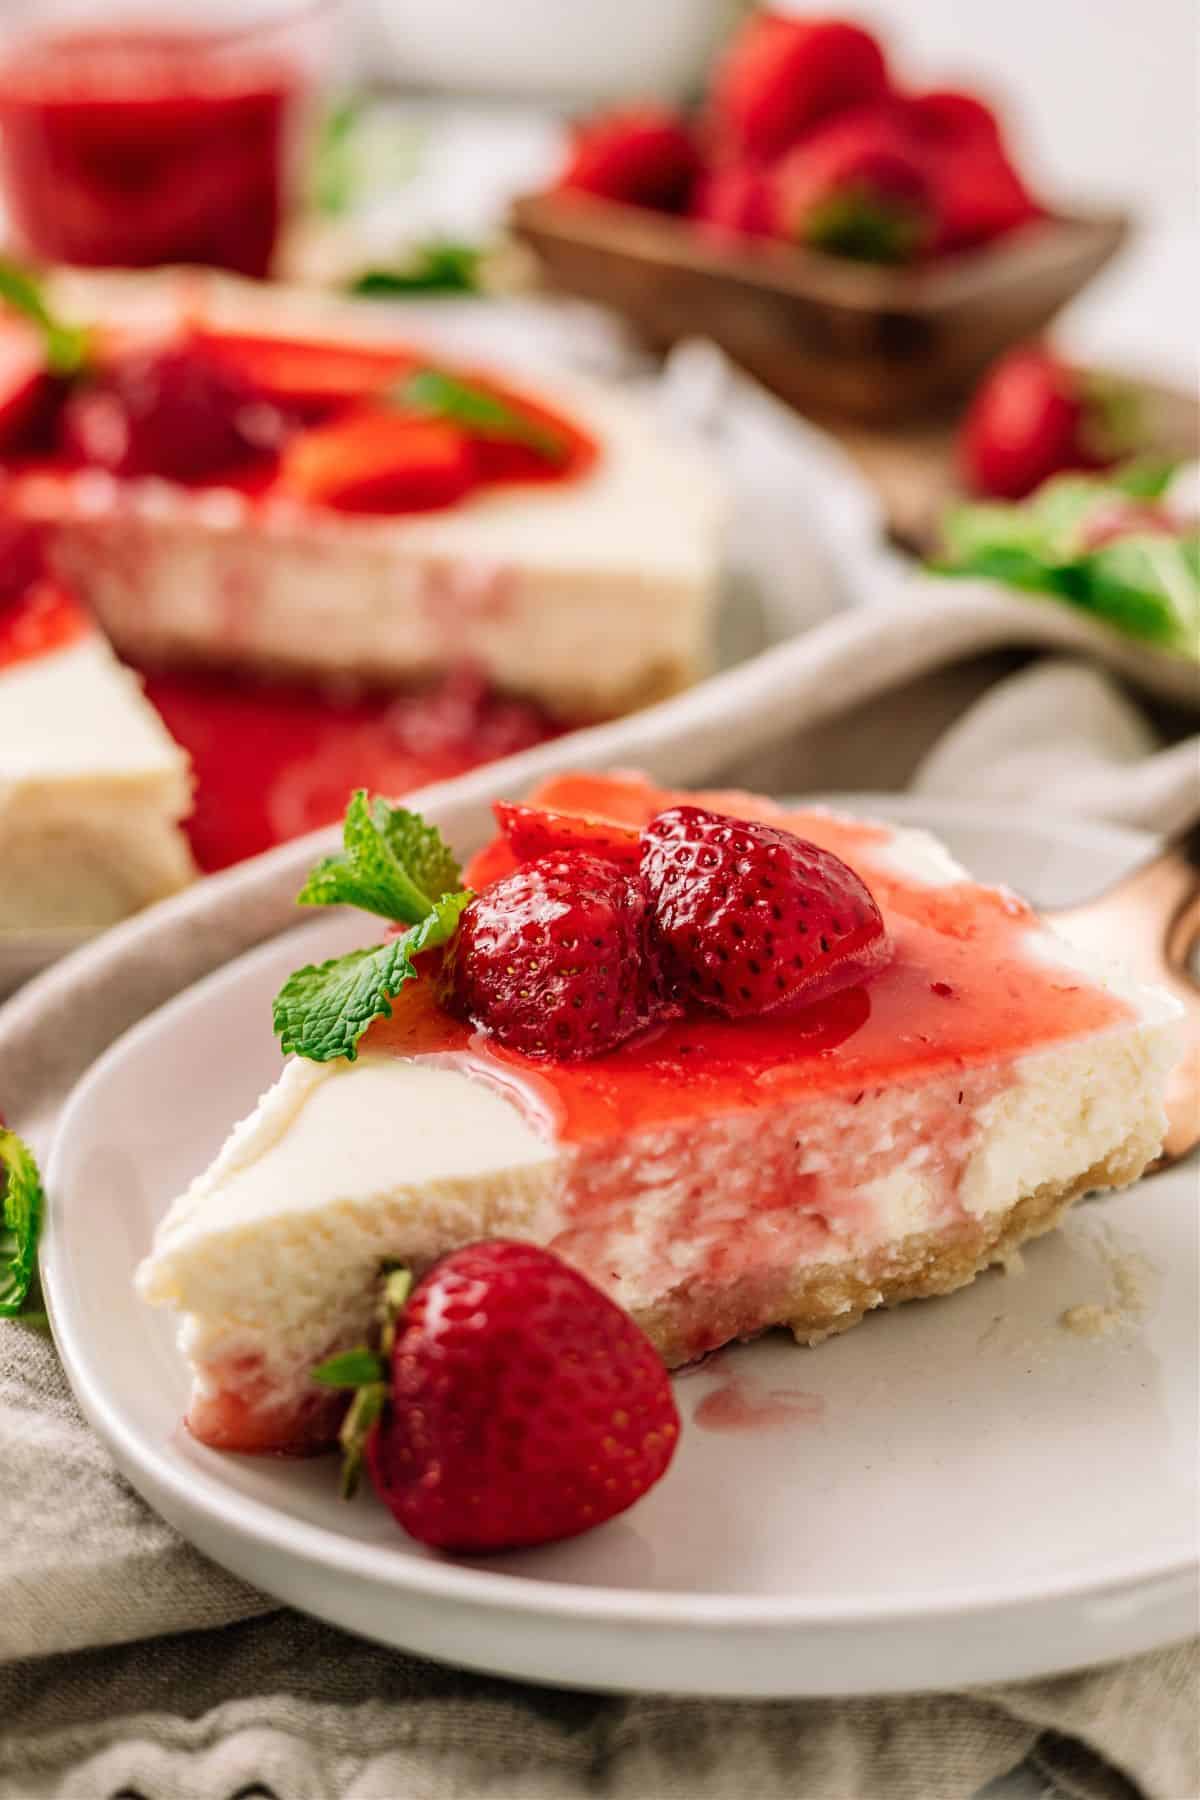 Keto Strawberry Cheesecake topped with strawberries on a plate